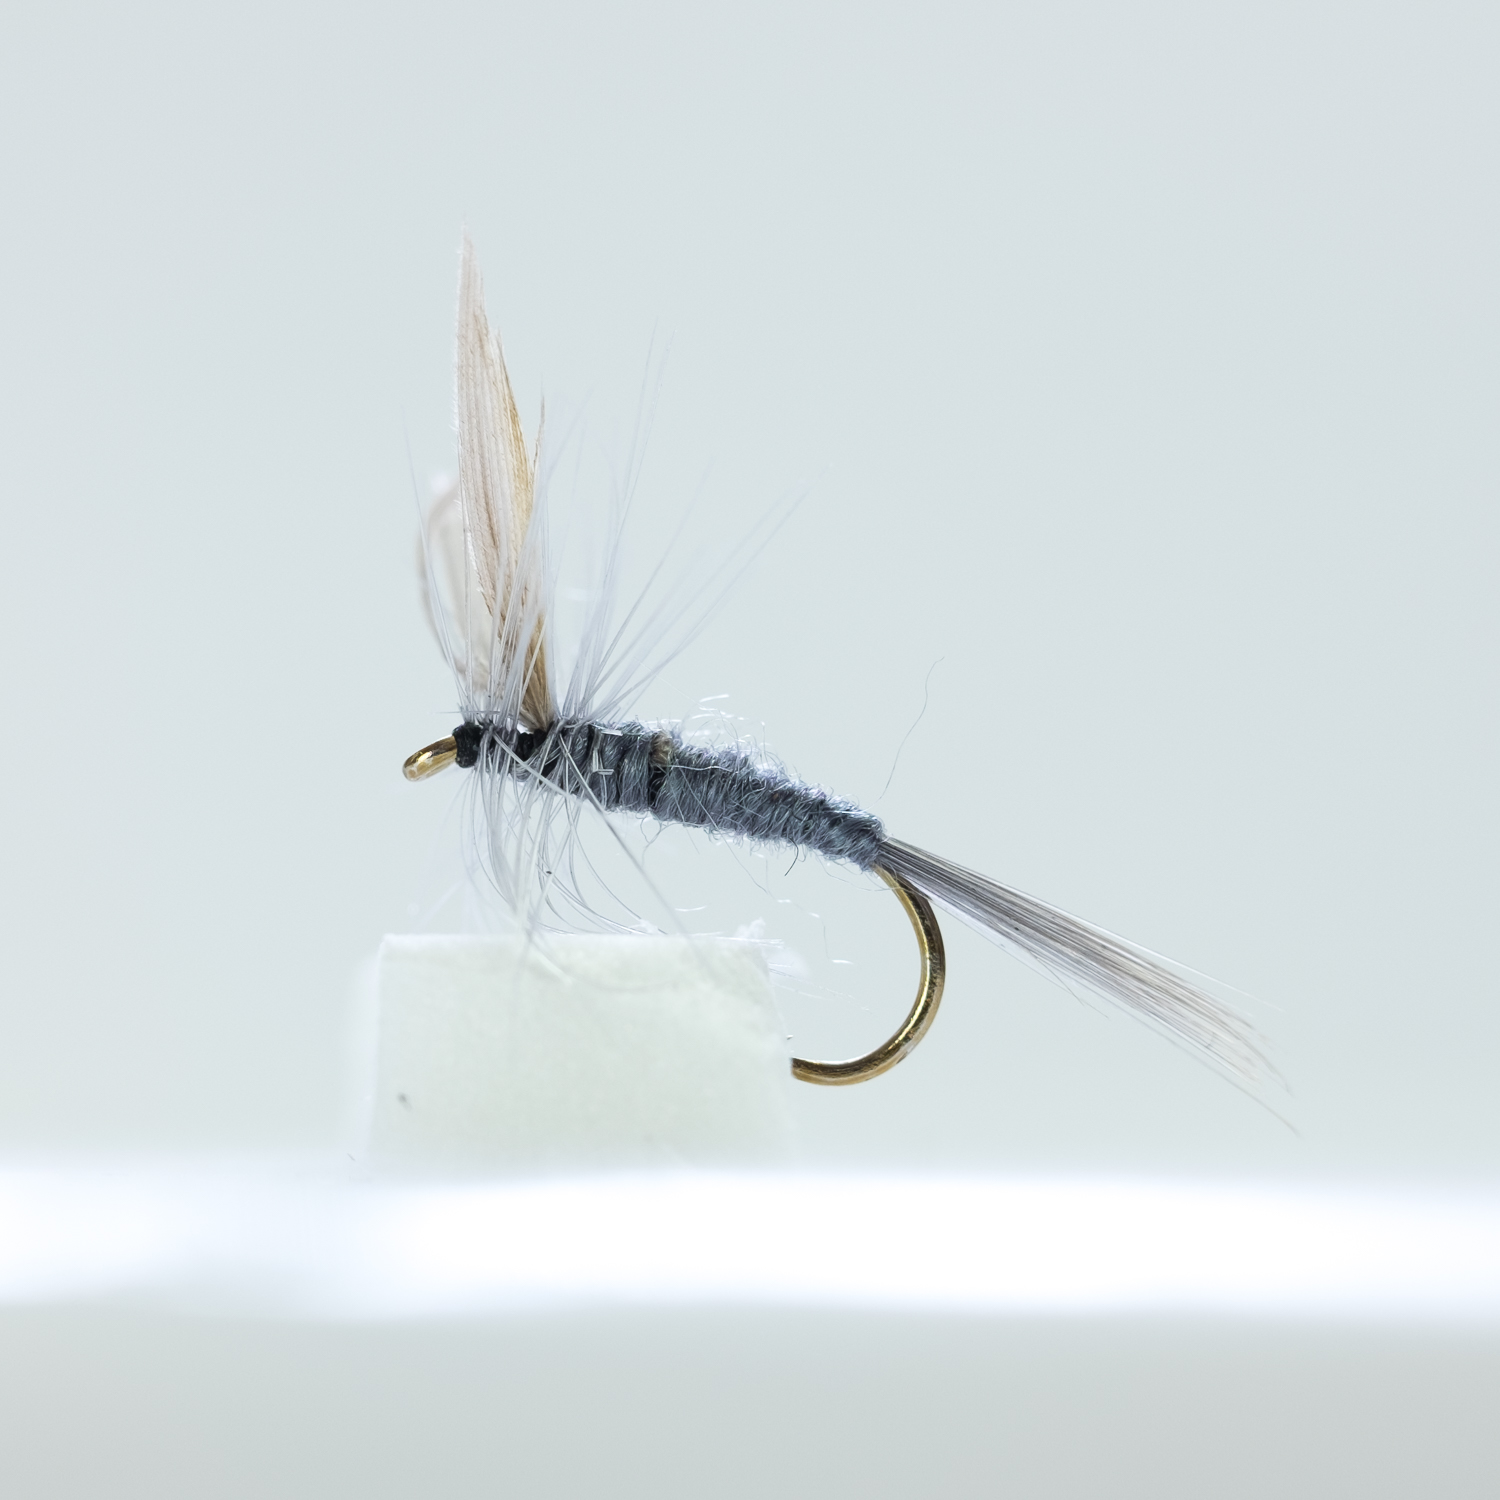 BLUE DUN PARA Dry Trout & Grayling fly Fishing flies by Dragonflies 